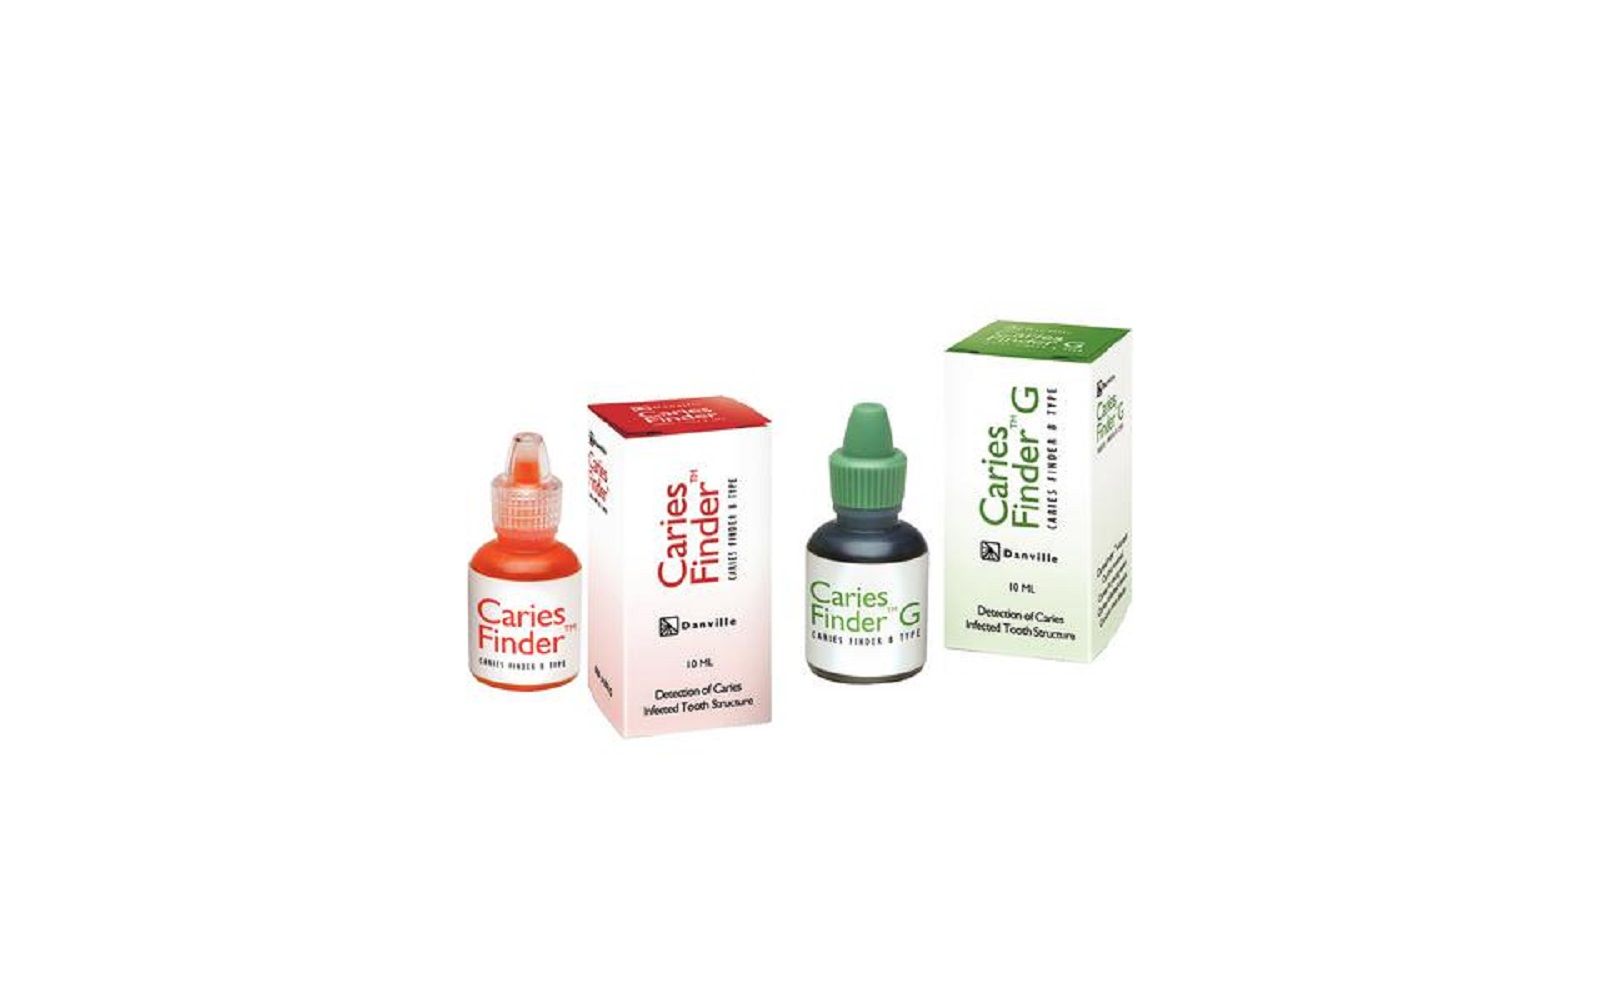 Caries finder™ caries disclosing dye, 10 ml bottle - danville materials